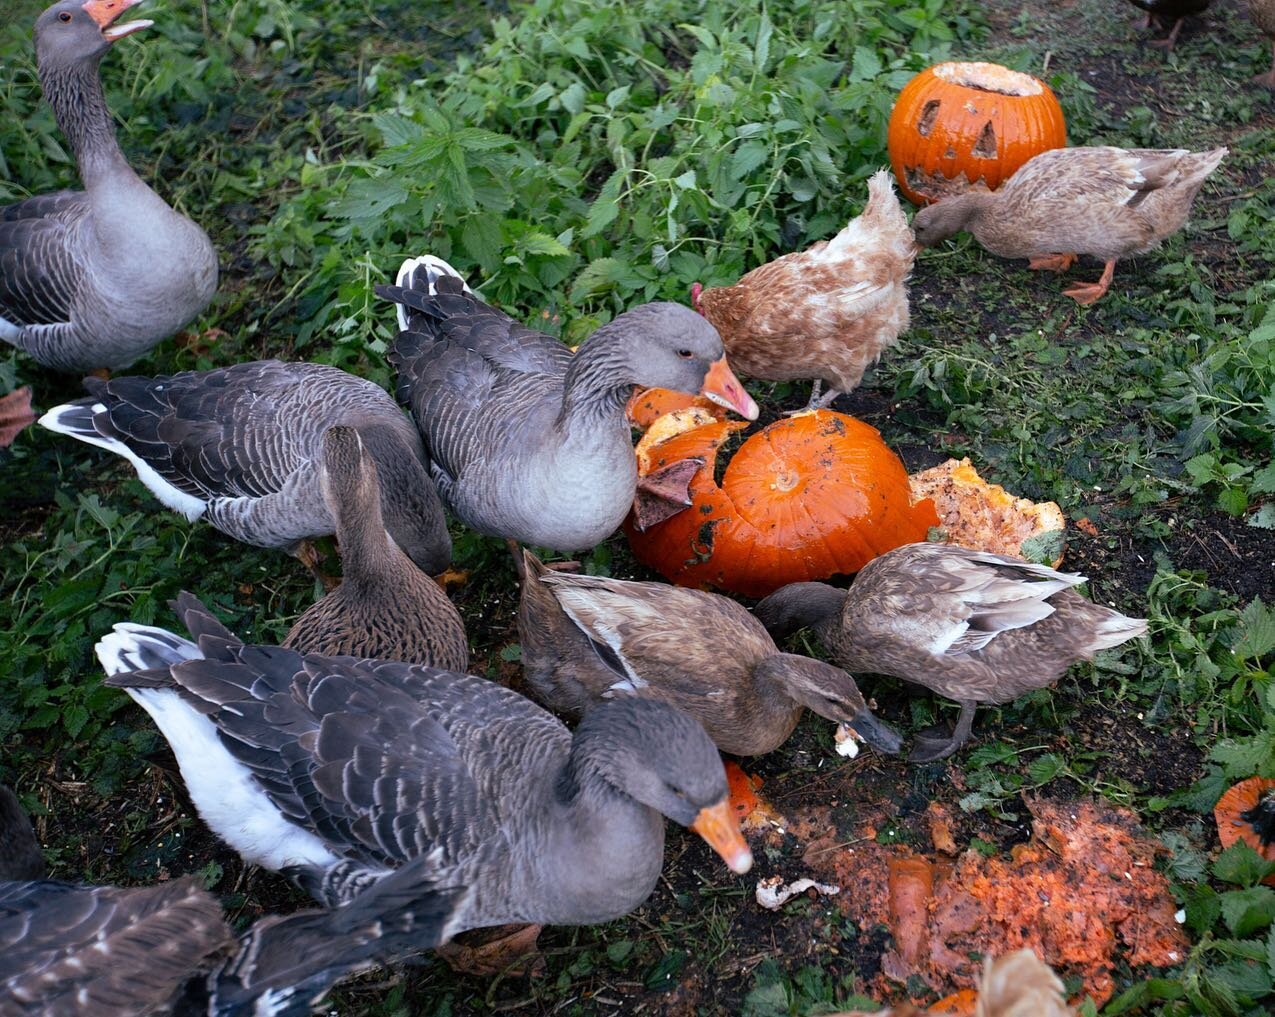 In the first weeks of November, as we reluctantly remove webs from our porches and bones from the dirt, many Halloween pumpkin decorations end up in landfills. The U.S. Department of Energy estimates more than 1 billion pounds of pumpkin are contribu